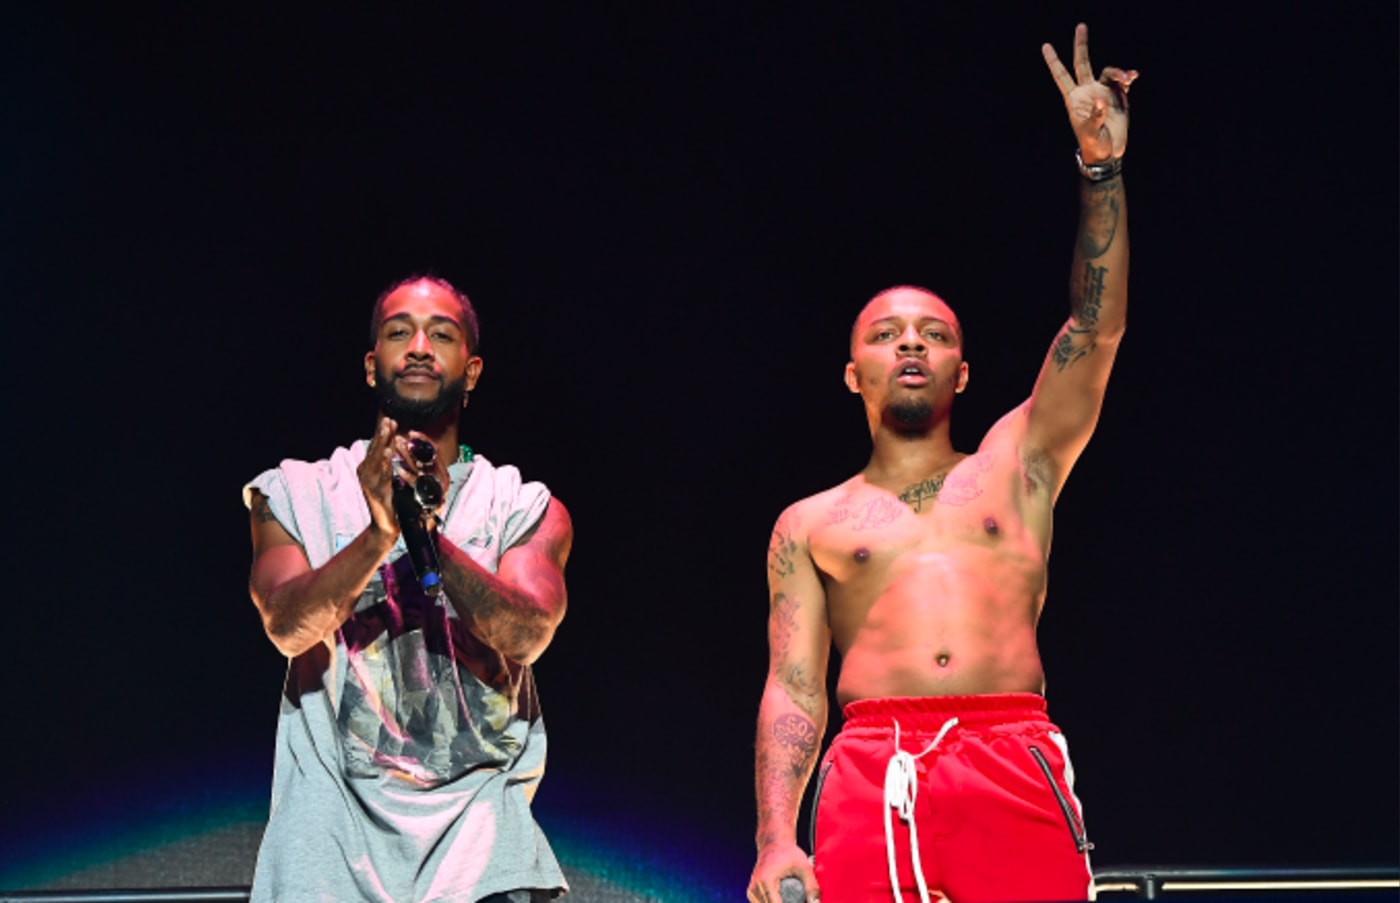 Singer Omarion and rapper Bow Wow